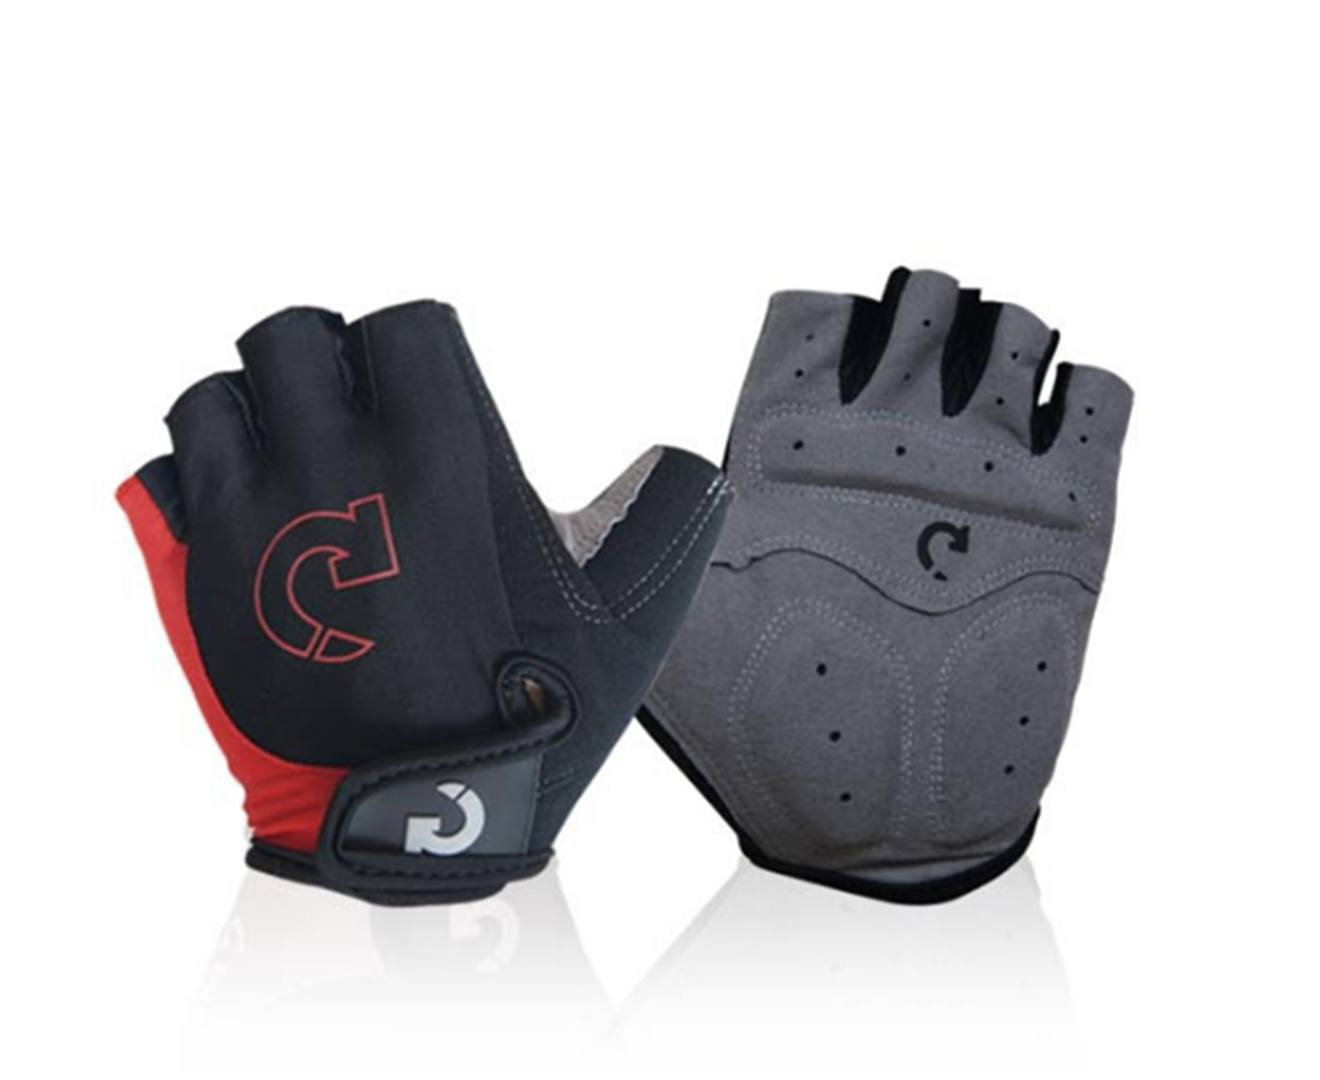 Mountain Bike Gloves Half Finger Road Racing Riding Gloves with Light Anti-Slip Shock-Absorbing-Red